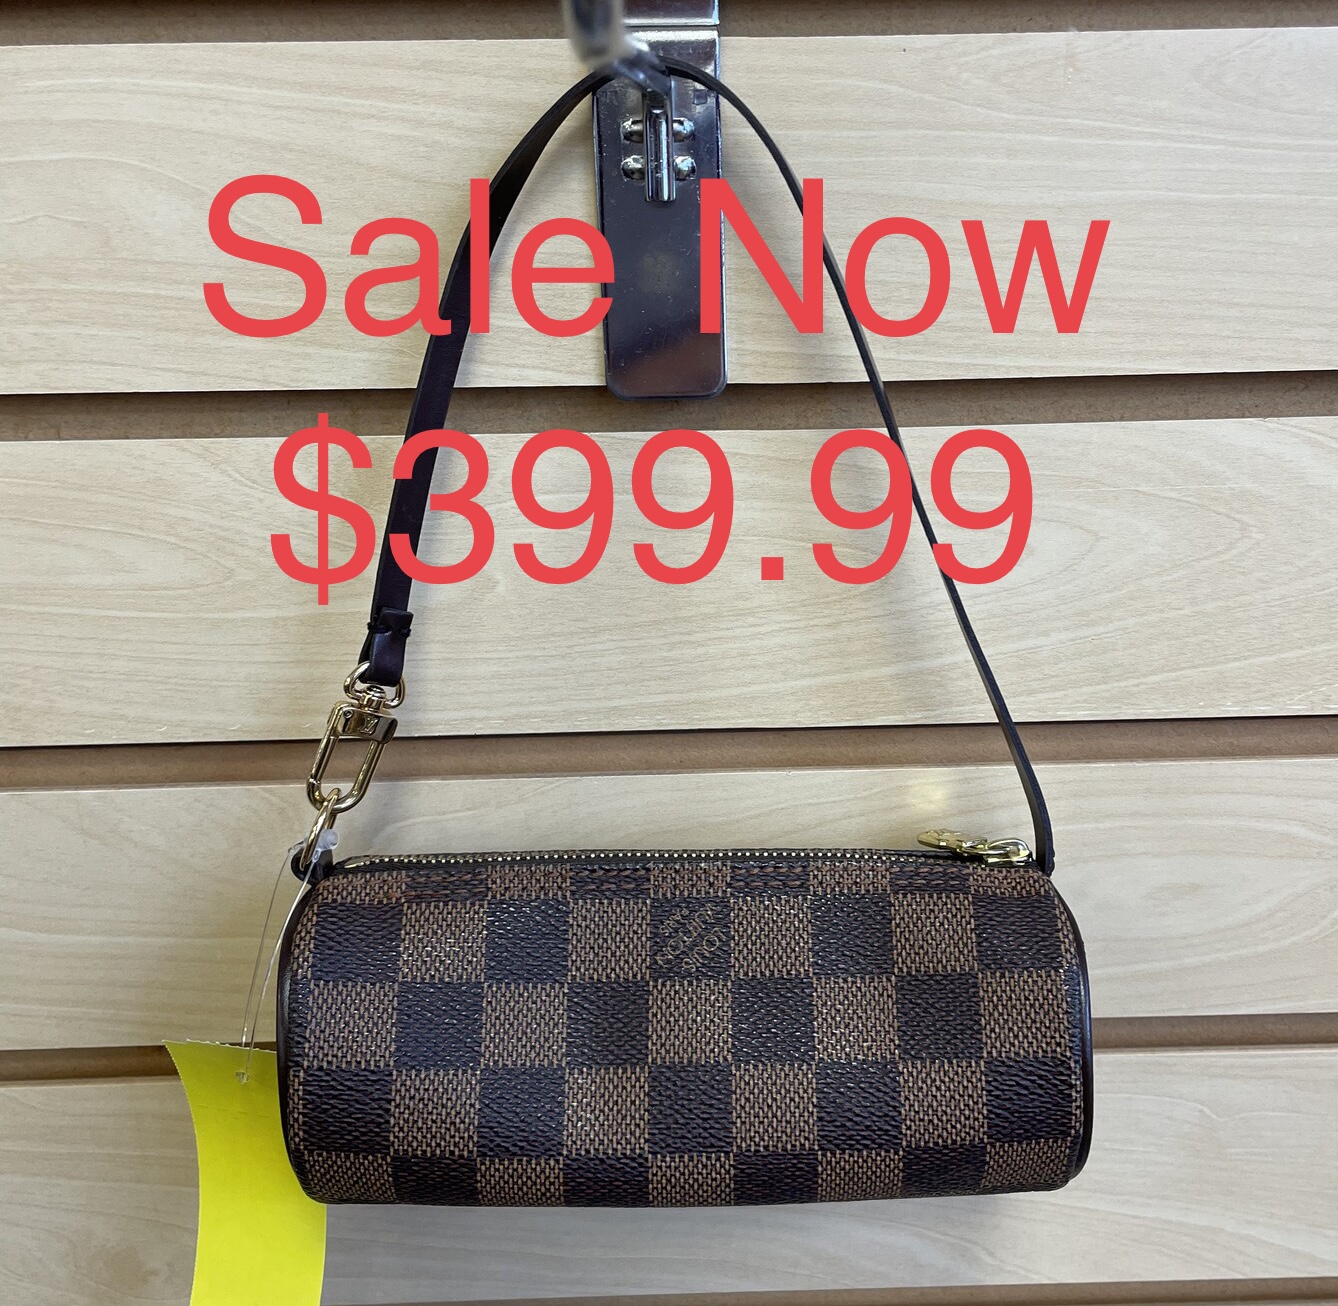 Sale!! was $499.99 NOW $399.99

Louis Vuitton Mini Papillion, Damier, Brown Coated Canvas Check Pattern with a Rust Leather Lining, Brown Leather Strap, Gold Hardware, Zippered Closure

Size: Length: 6 inches, Depth: 2.25 inches, Strap Drop: 5.5 inches

*Additional shipping and insurance rates will apply. A separate invoice will be sent due to the value of this item.